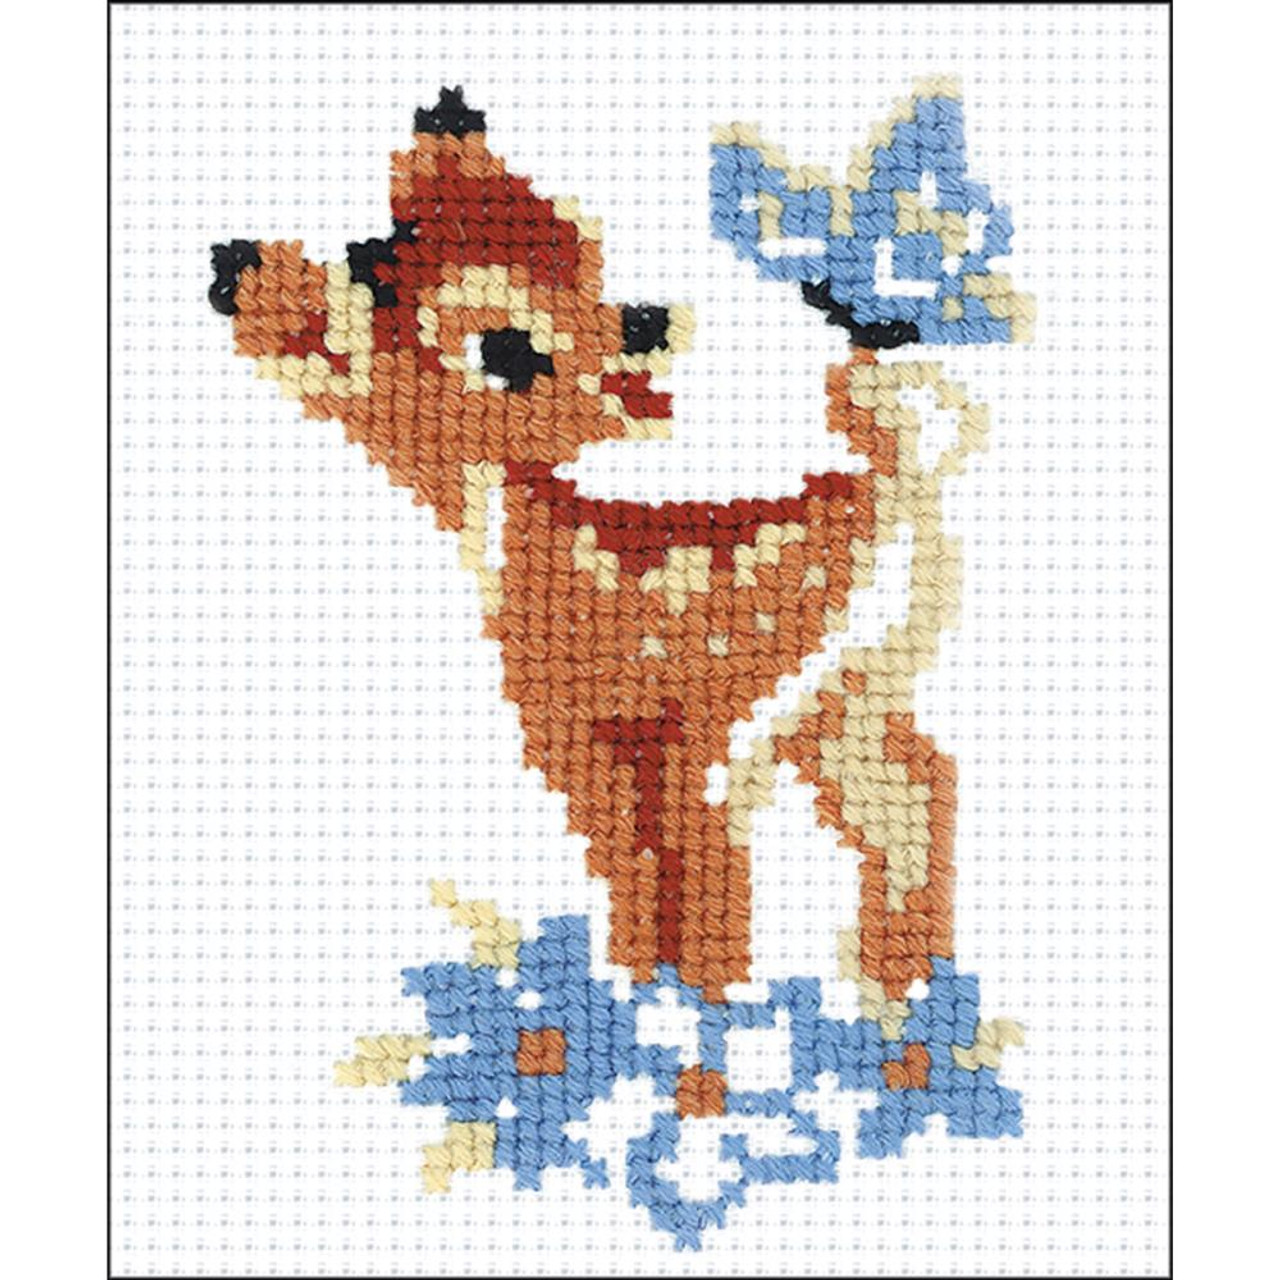 Riolis Lily of The Valley Counted Cross Stitch Kit-5x6.25 16 Count